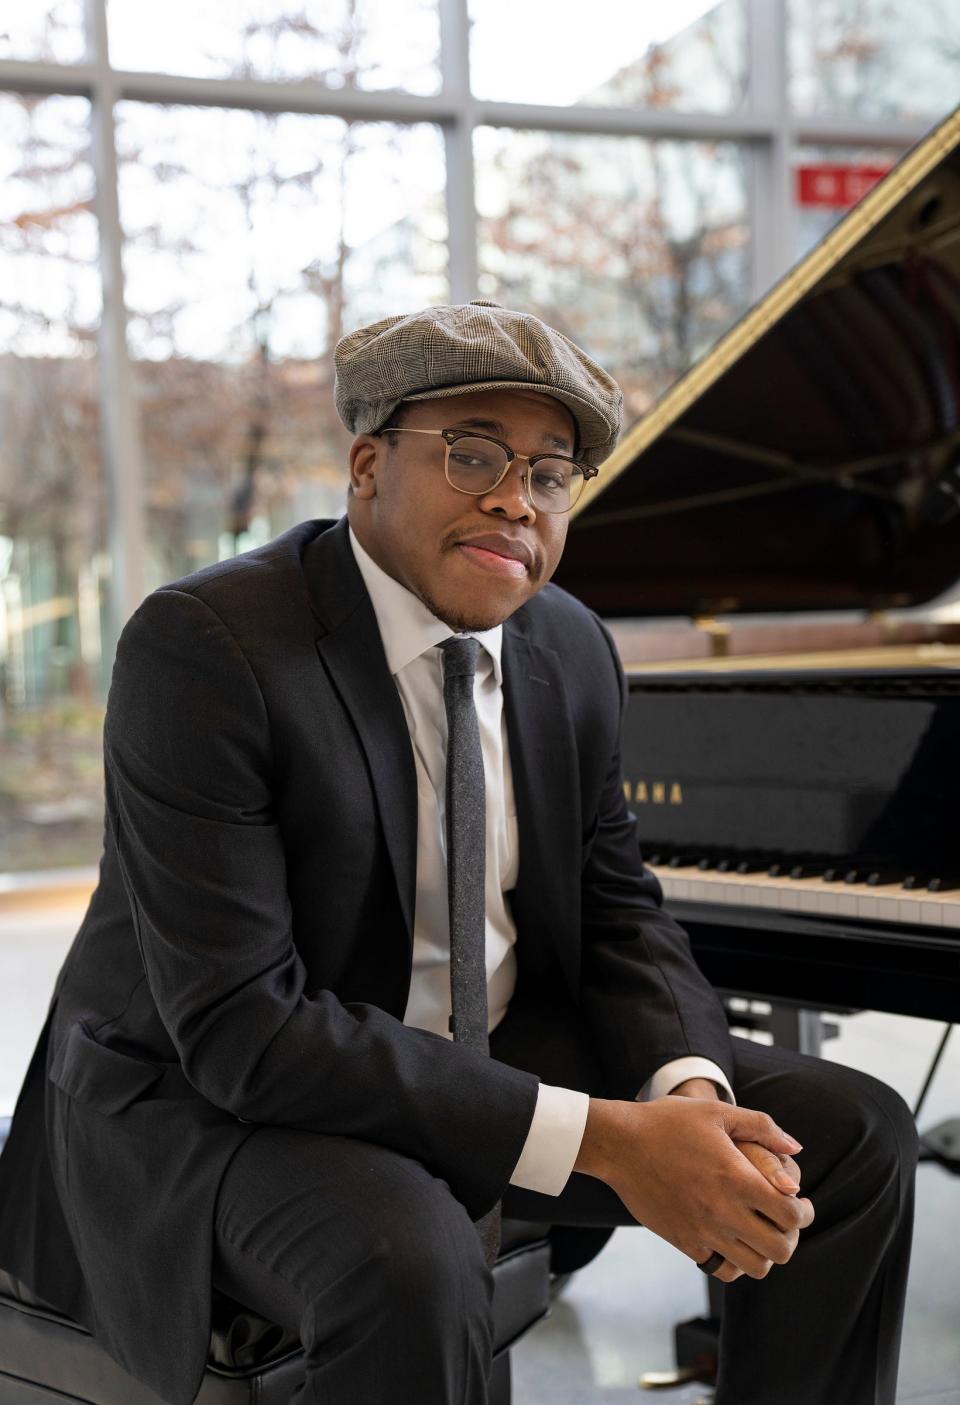 Isaiah J. Thompson plays Vince Guaraldi and more at Caffe Vivace on Dec. 1.